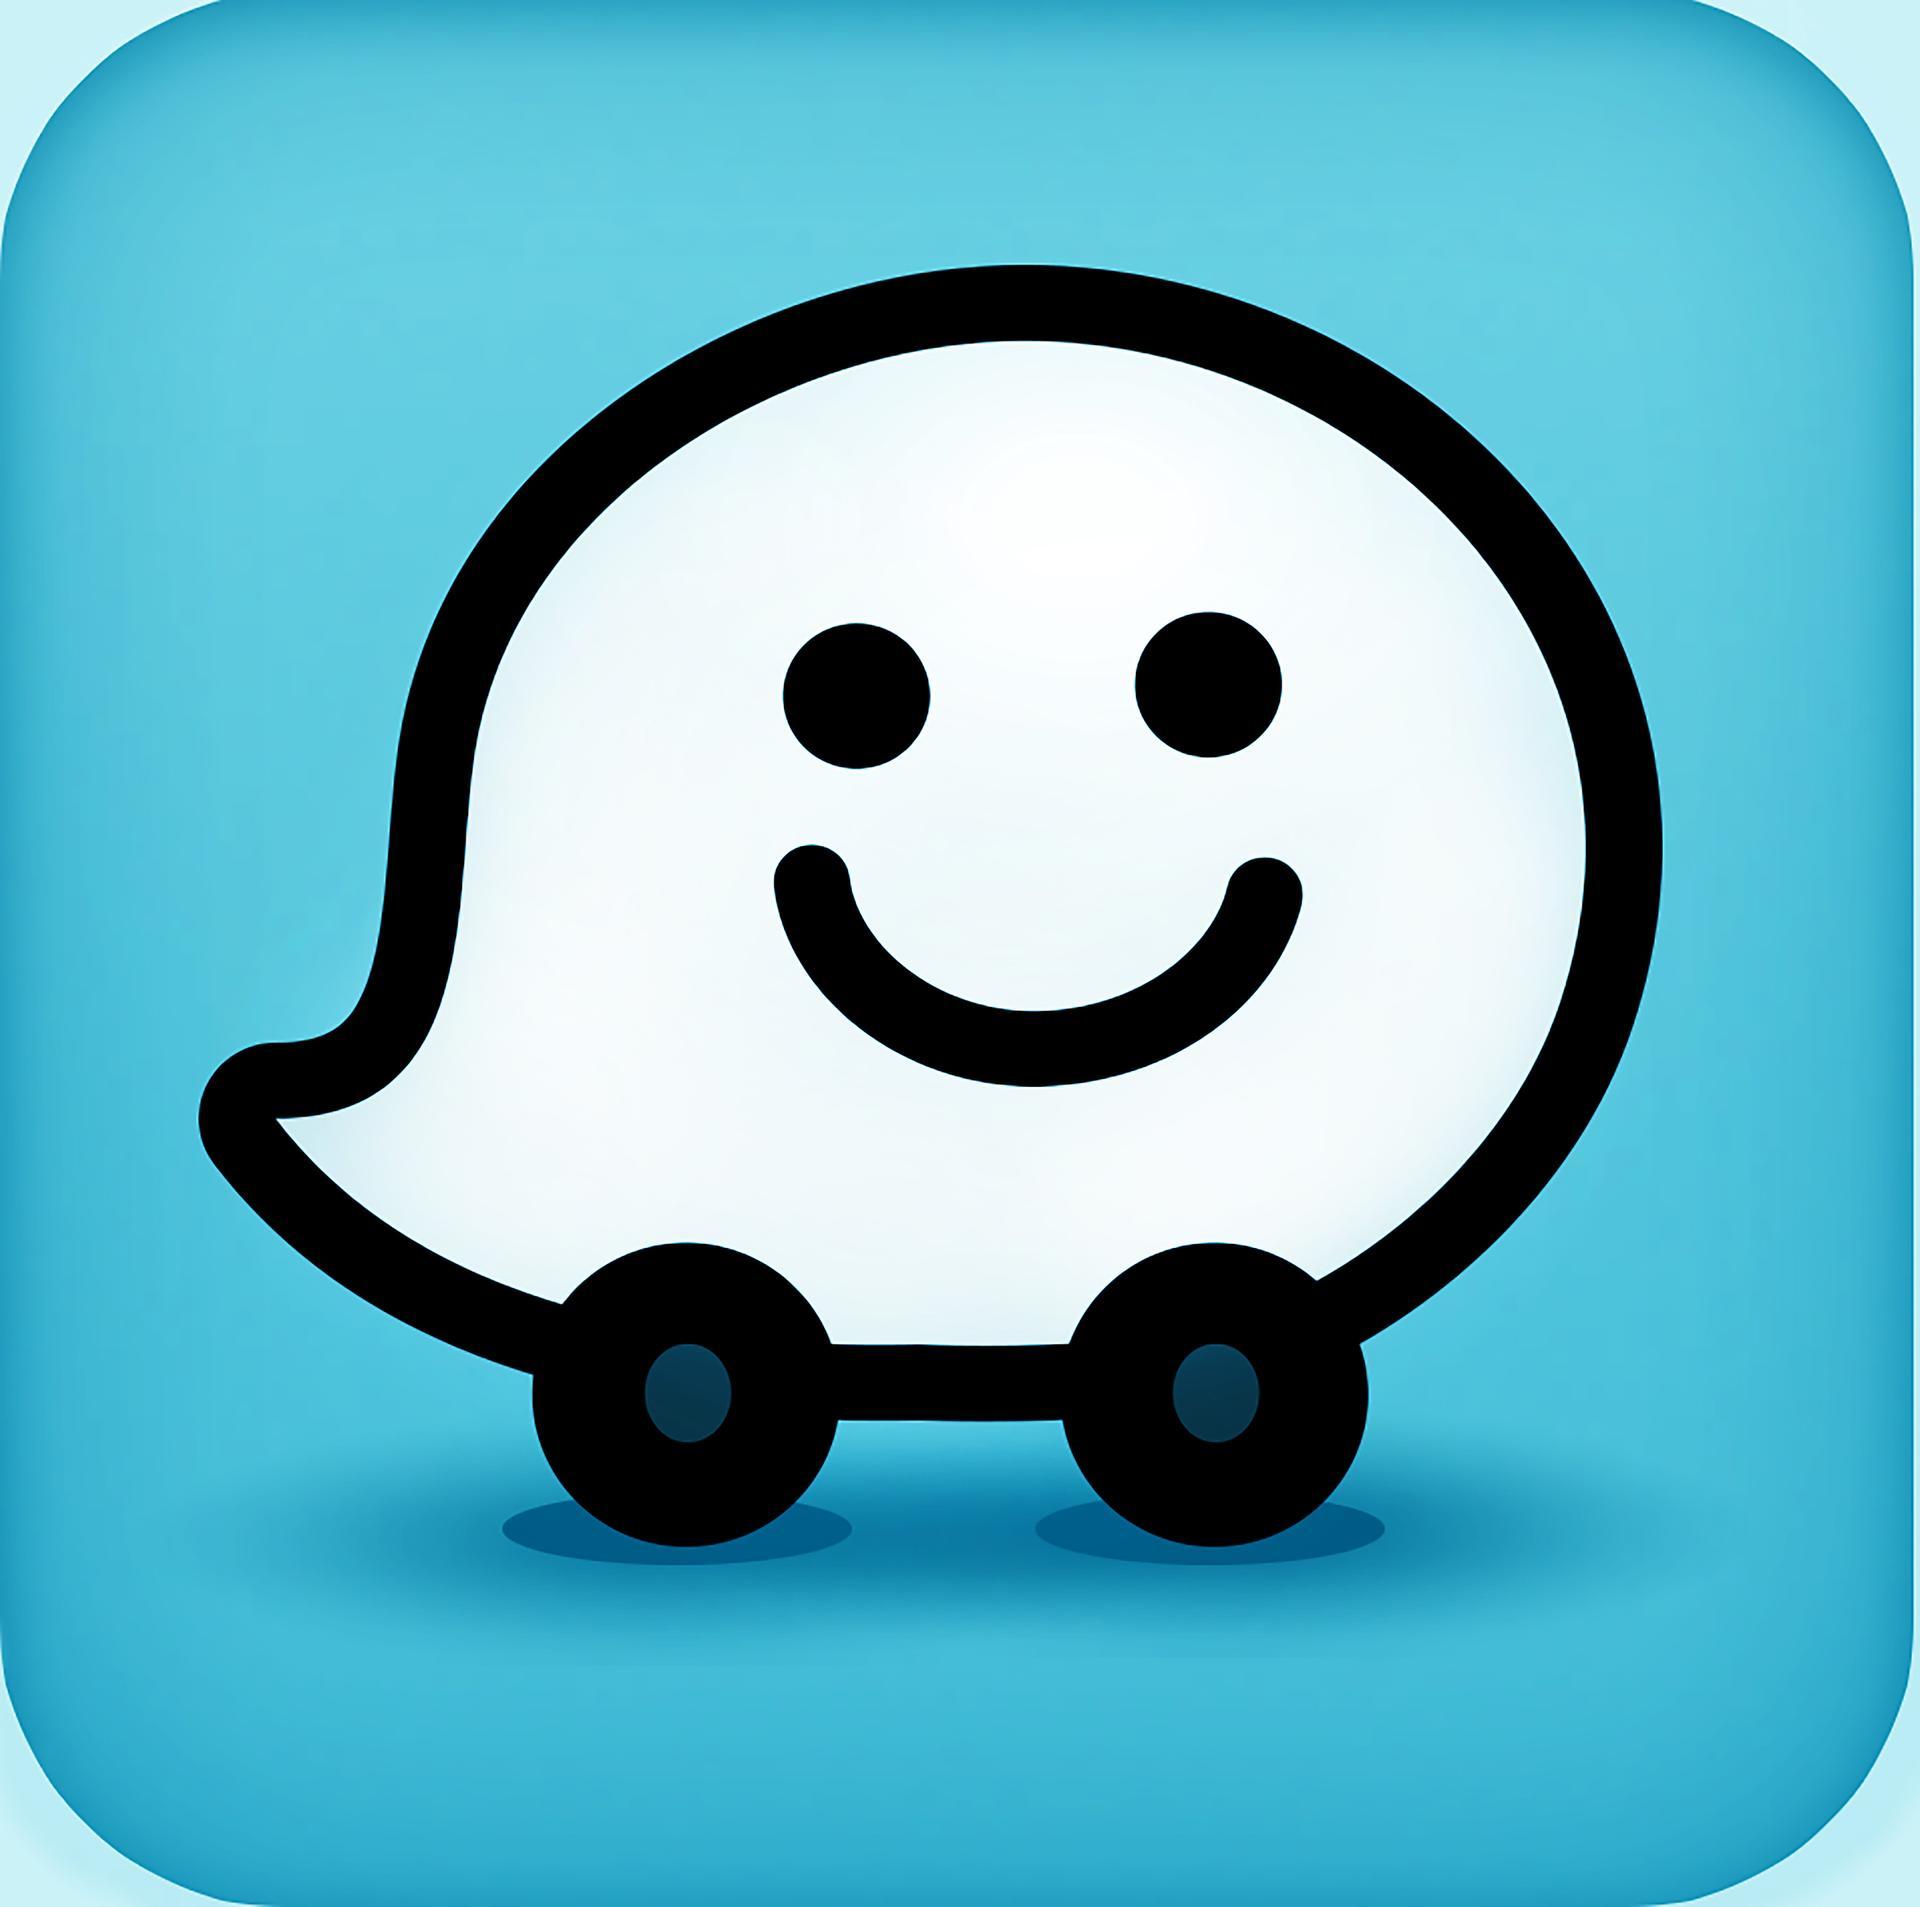 Waze - for driving directions and traffic information.